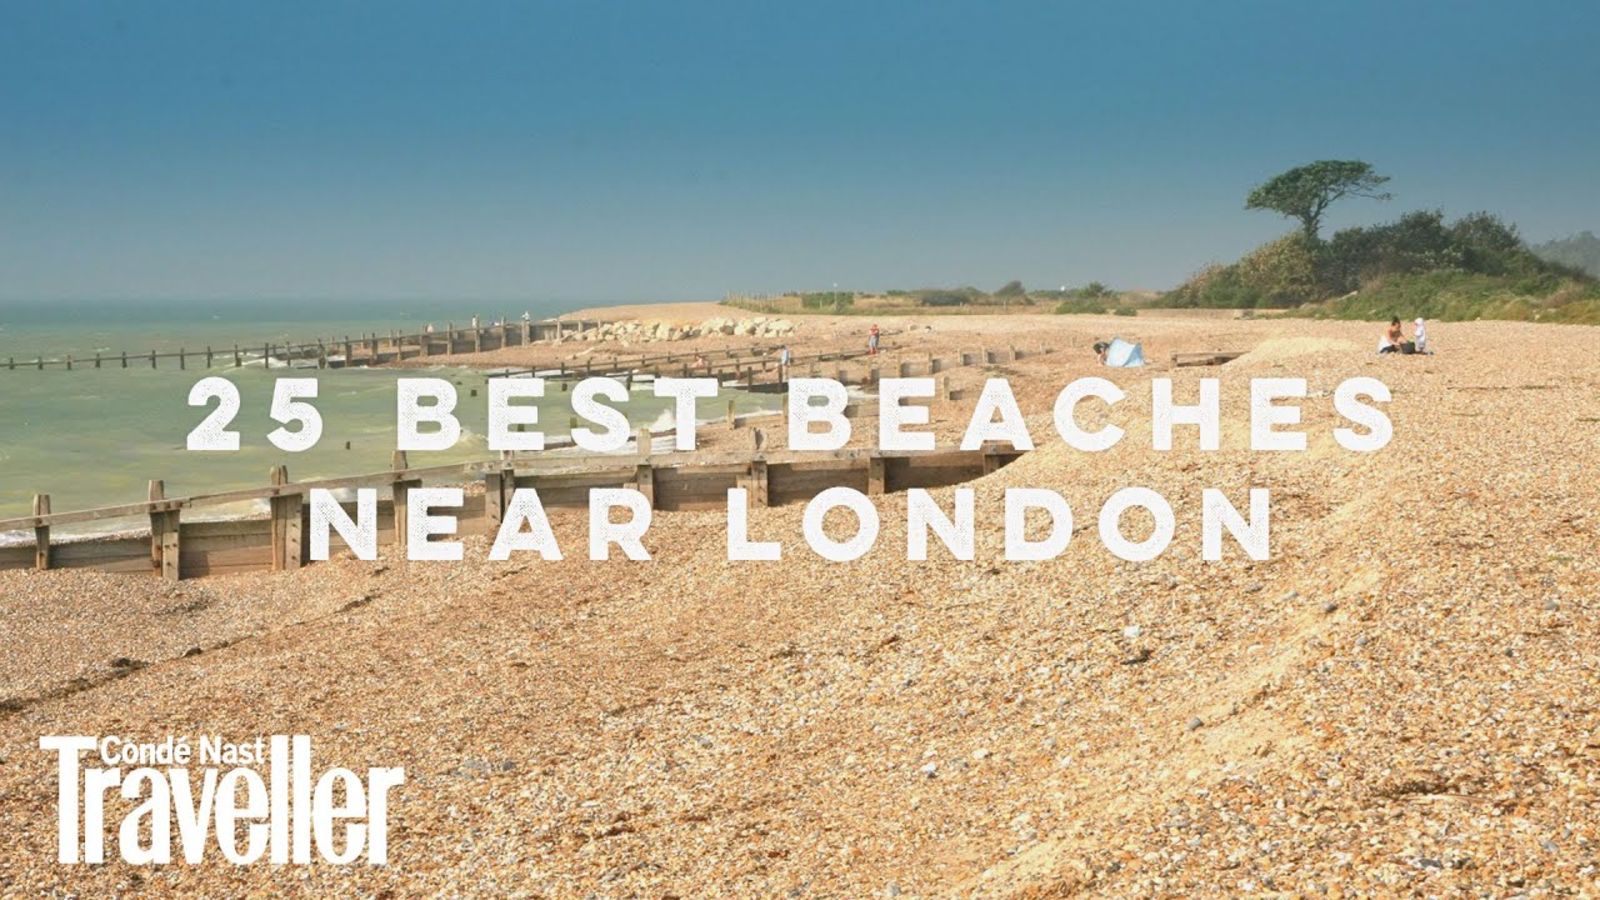 The best beaches to visit near London